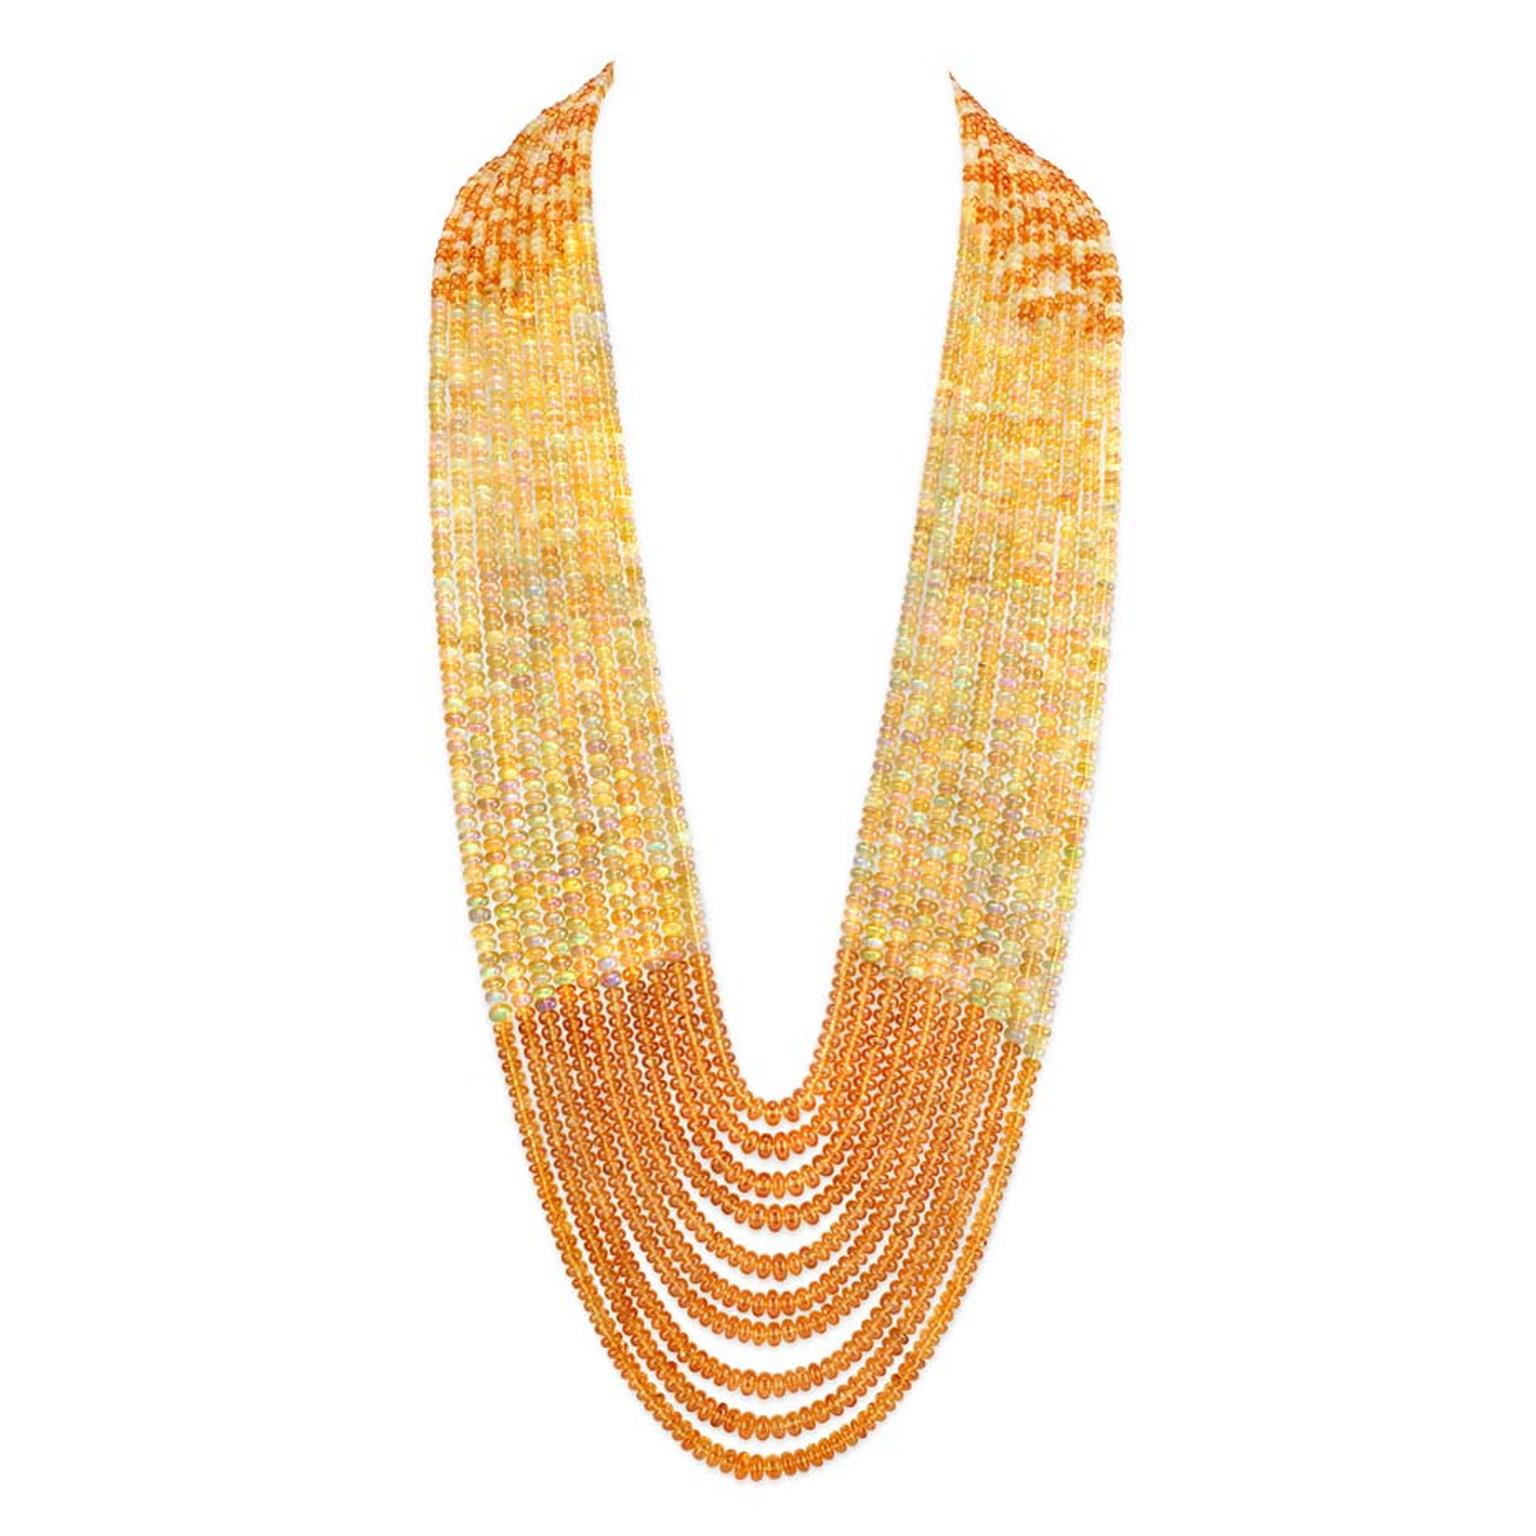 Erica Courtney will be bringing this eye-popping opal bead necklace to the Couture Show Las Vegas